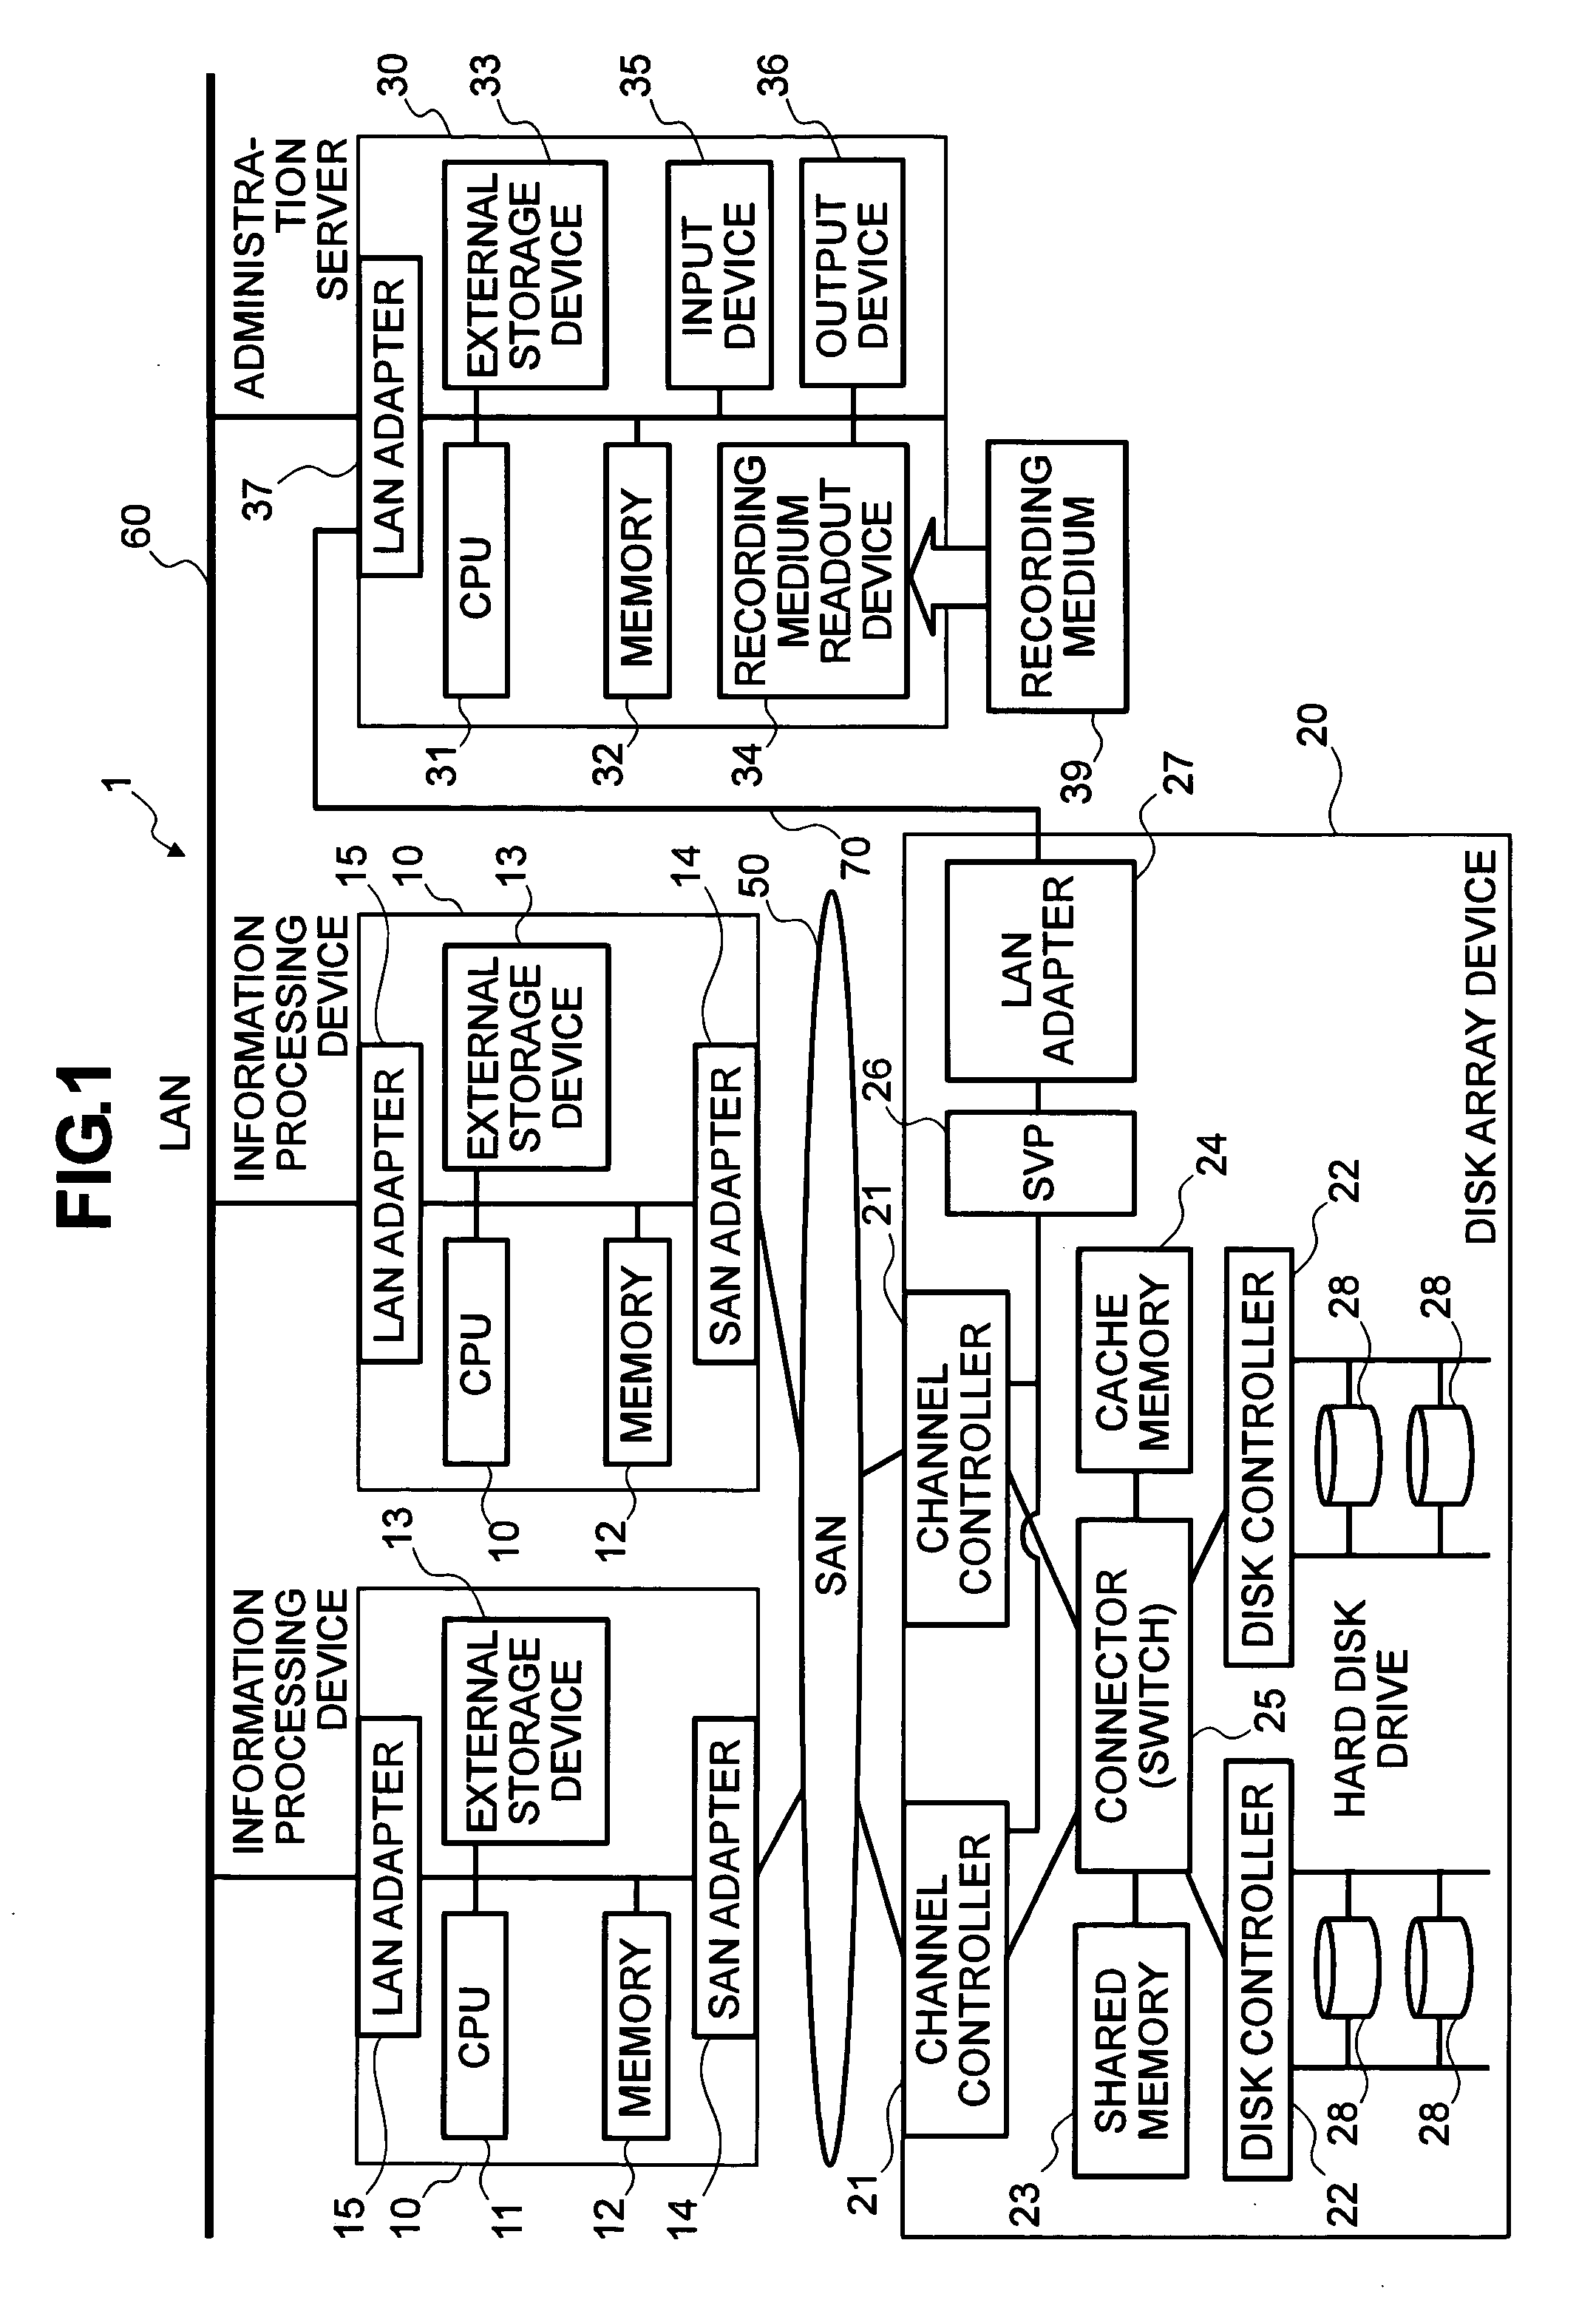 Storage system, storage control device, and control method for storage system